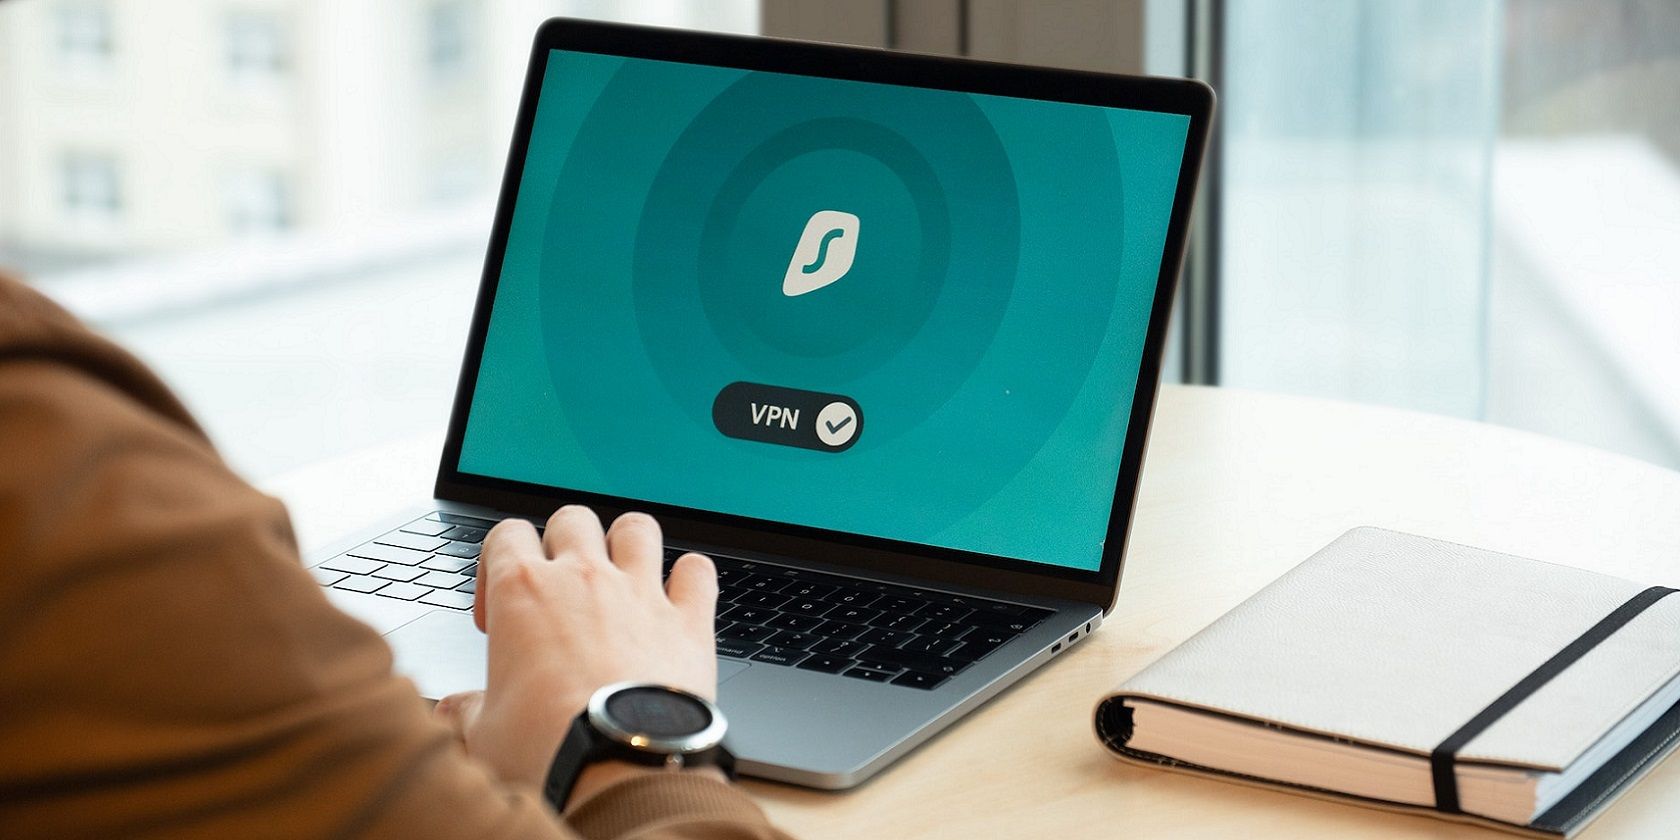 A laptop with VPN software on it